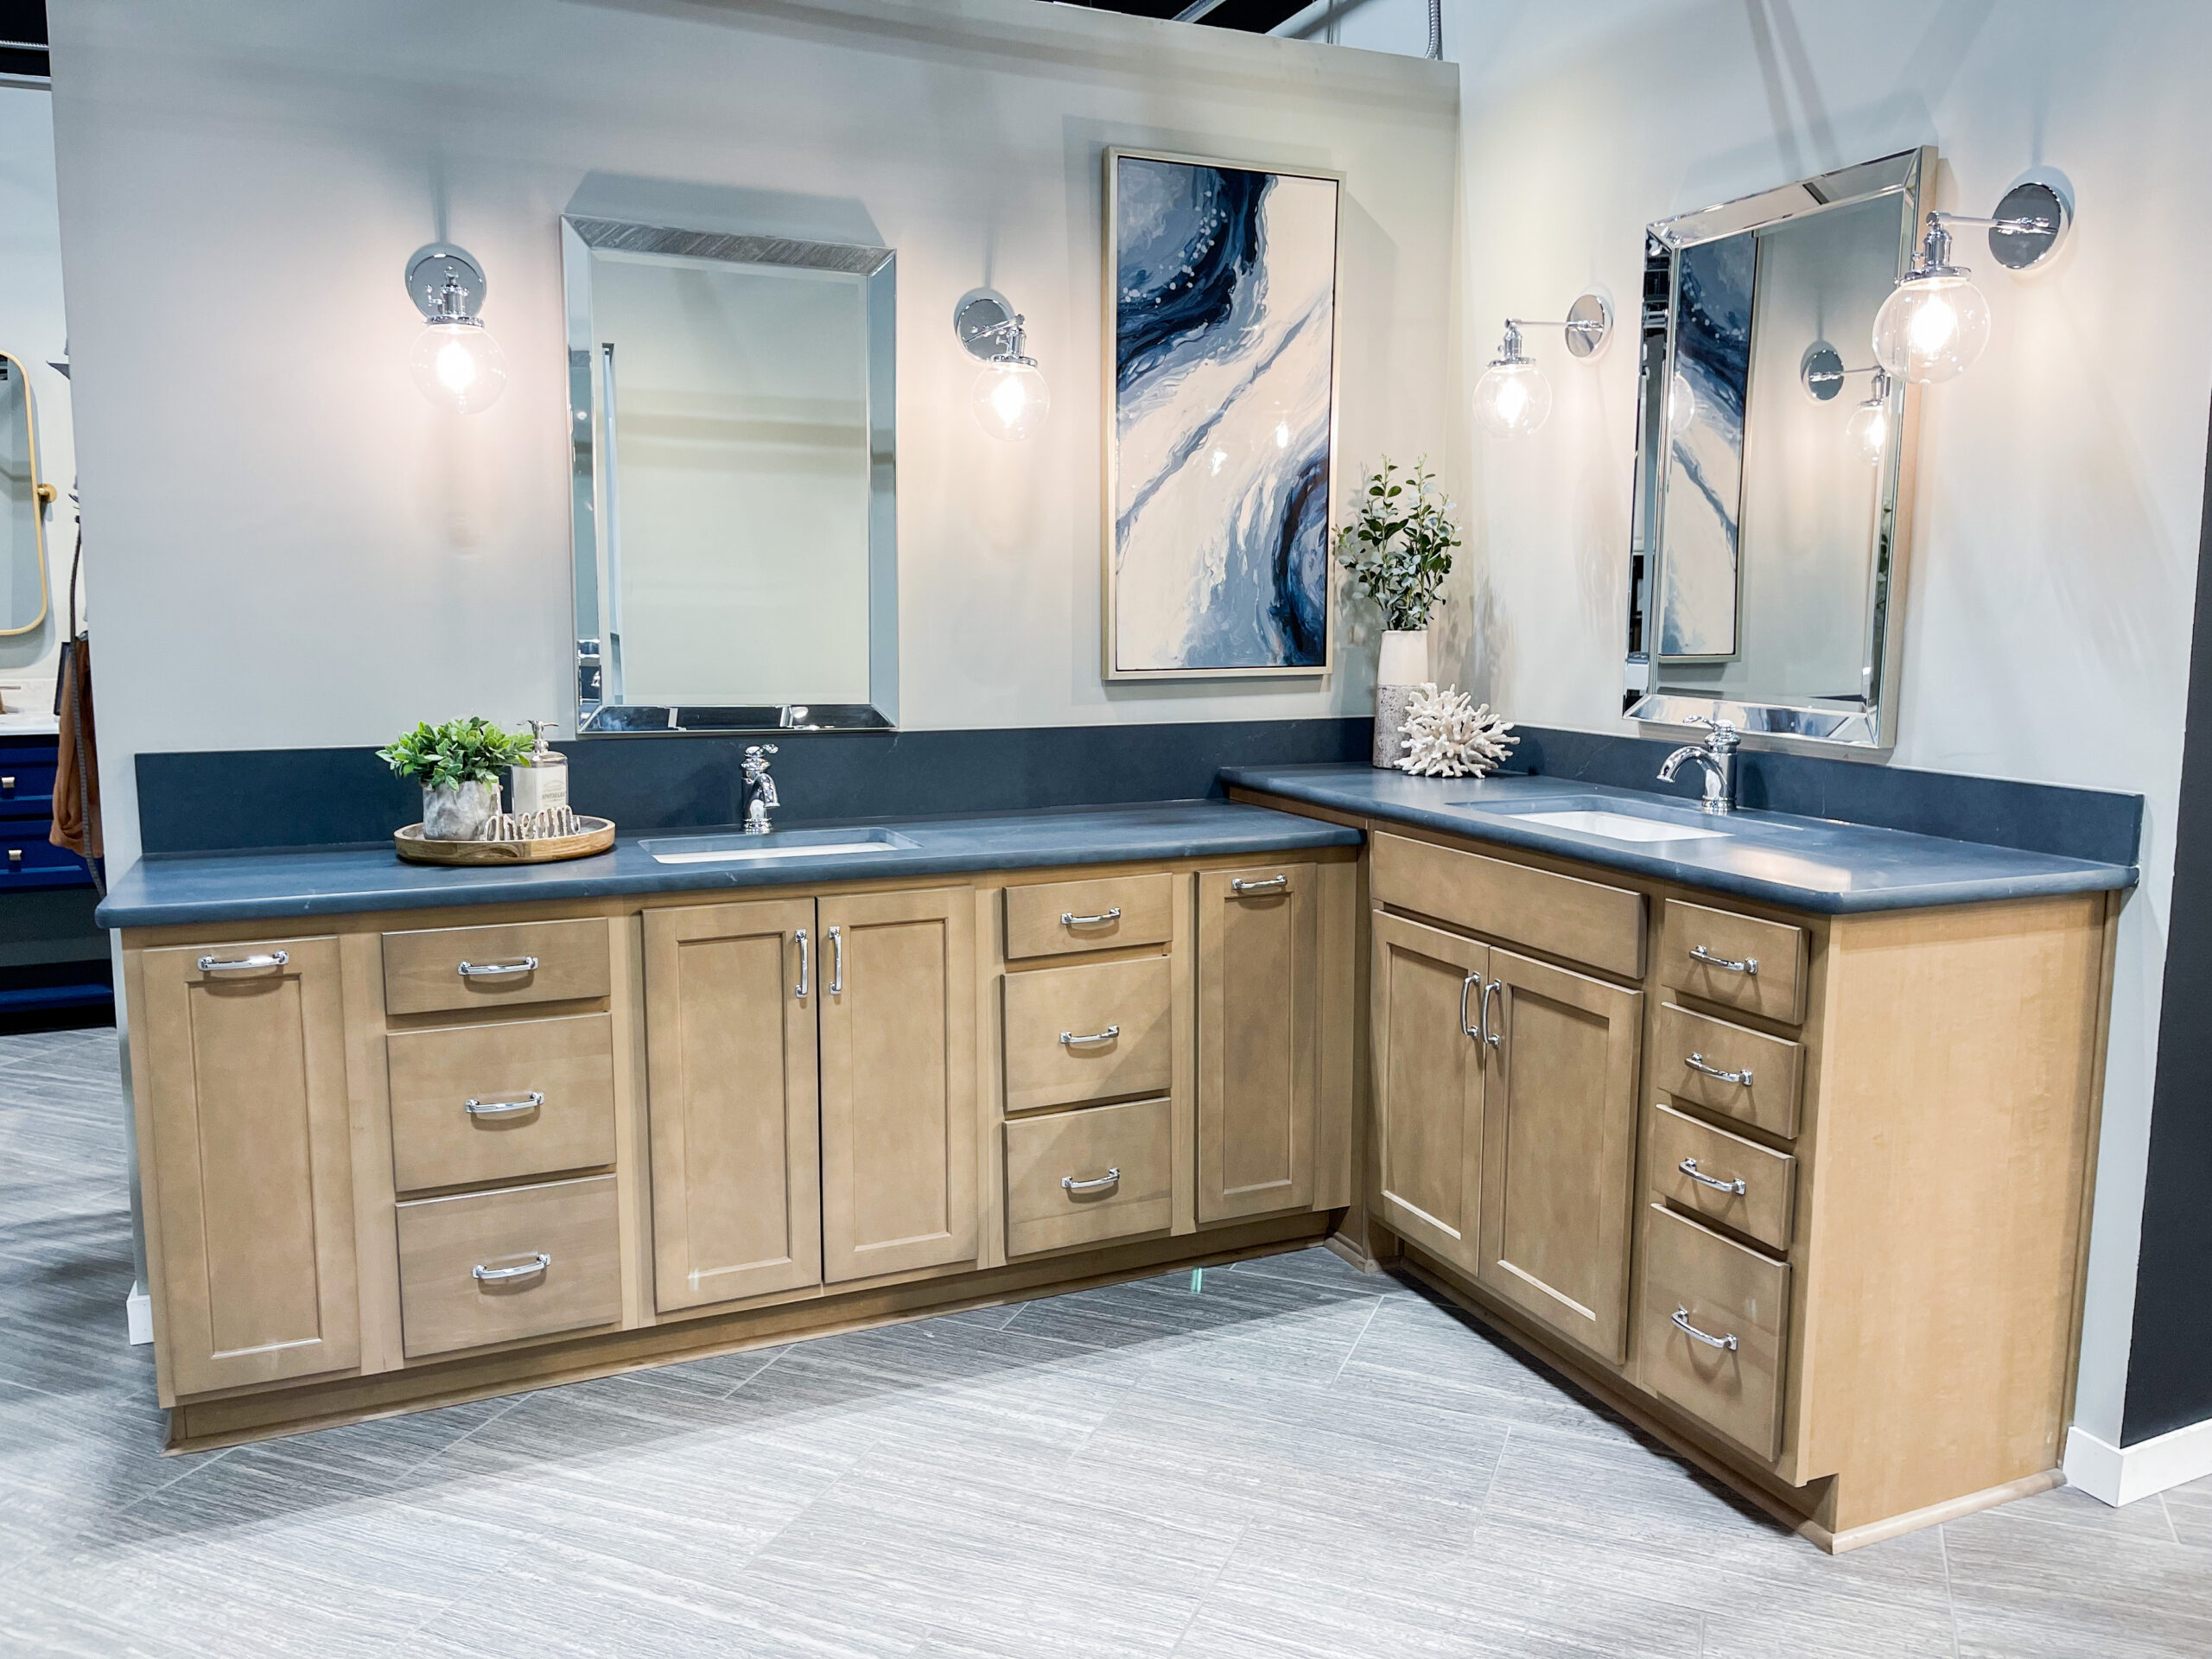 Vanity Pullout Cabinet - Aristokraft Cabinetry